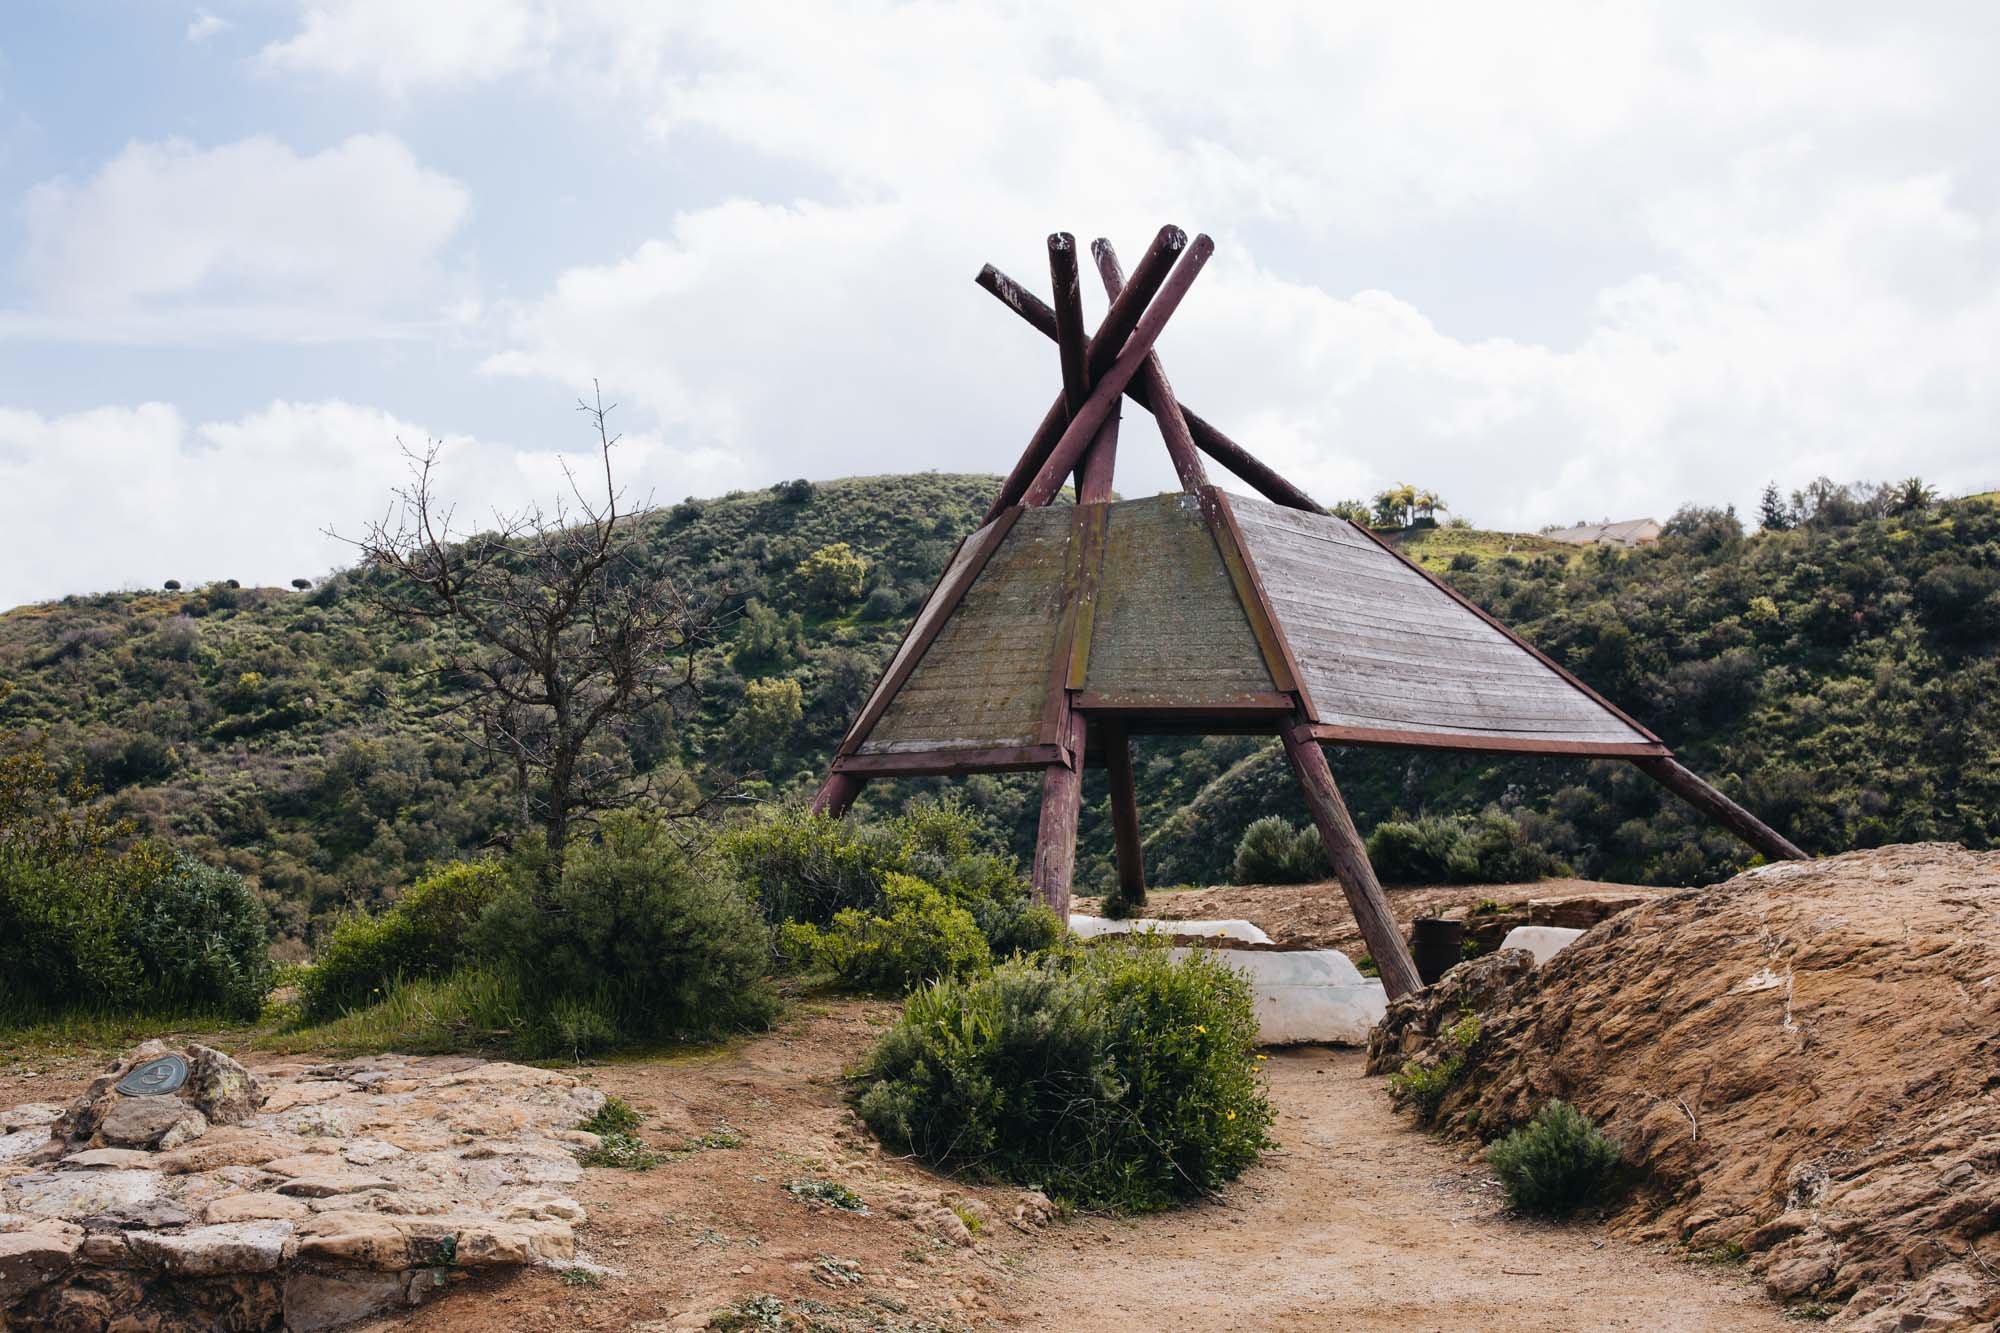 The teepee house - Picture of Paradise Falls, Thousand Oaks